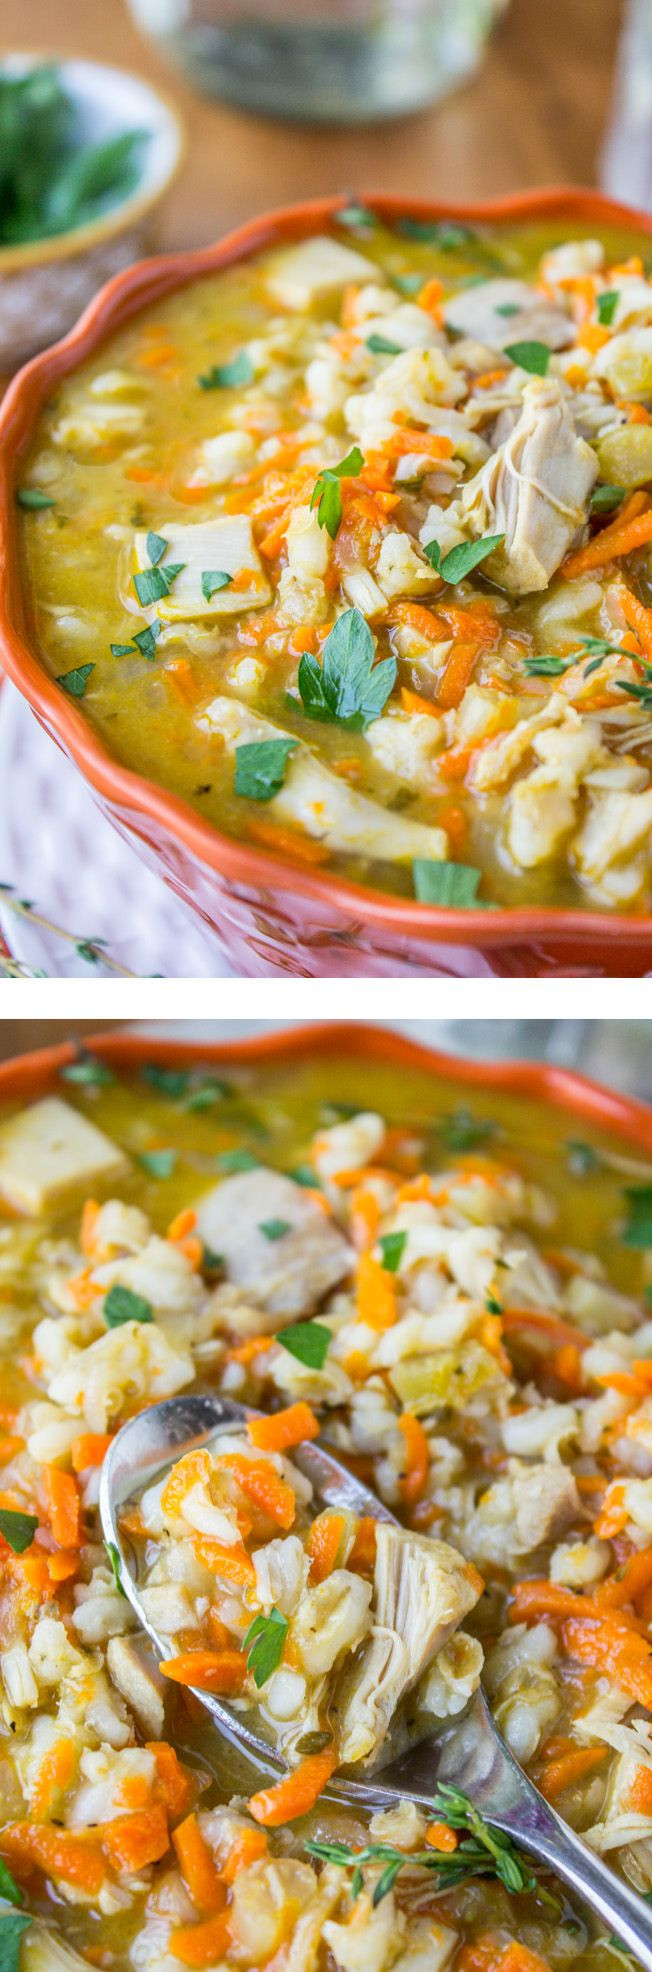 Turkey Soup From Thanksgiving Leftovers
 17 Best images about Turkey Leftovers on Pinterest